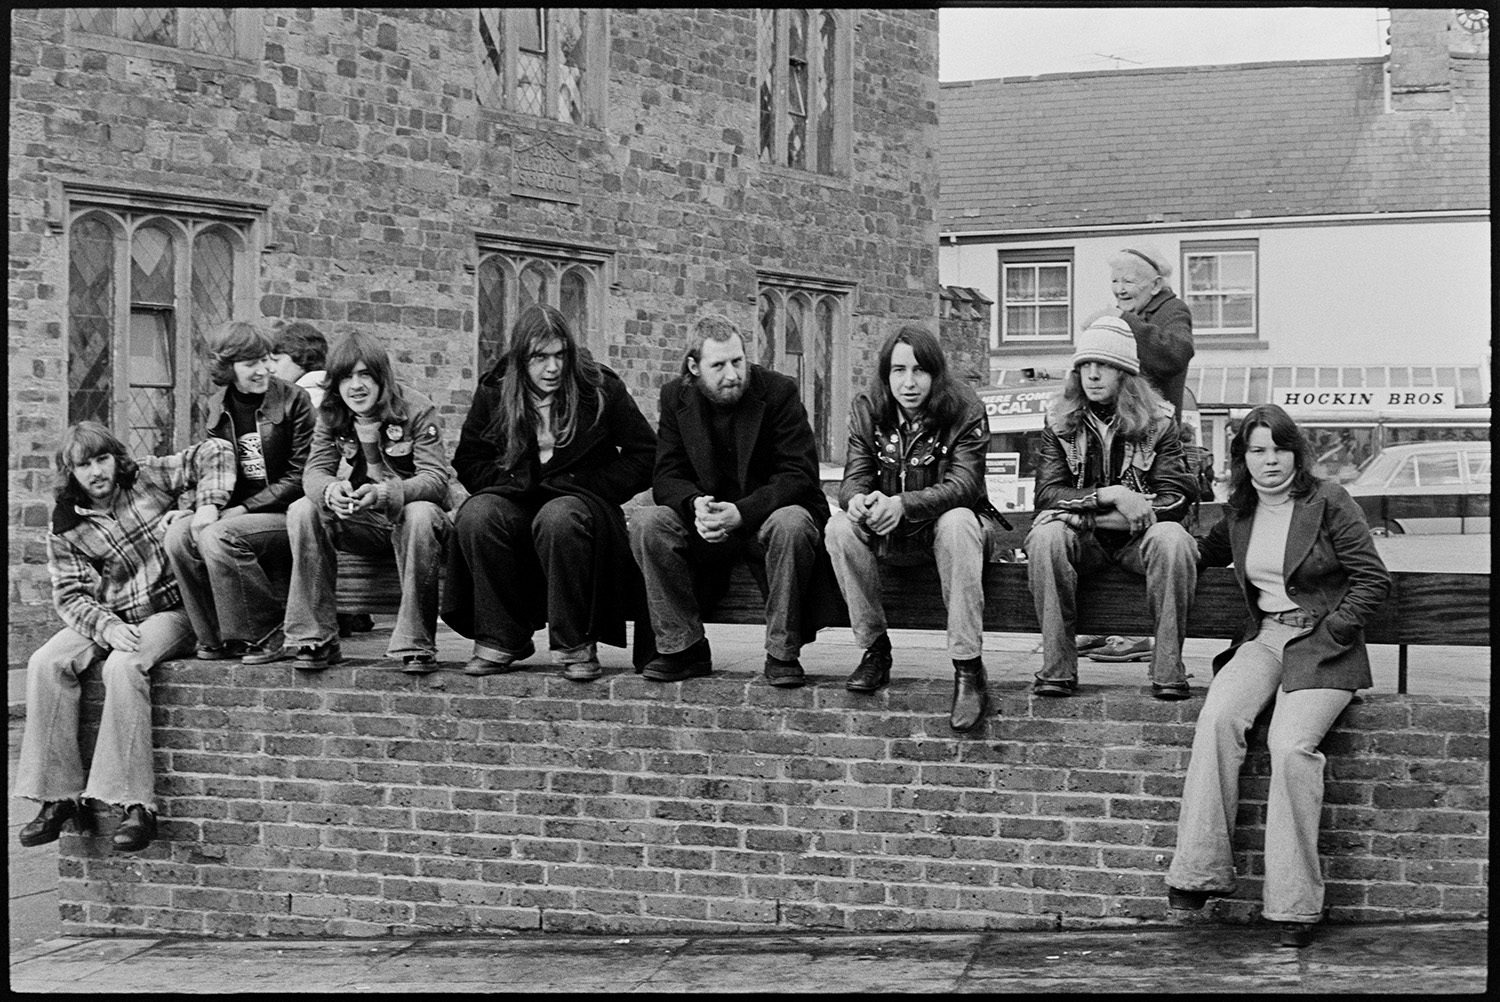 Woman and young men waiting for carnival. 
[A young woman and young men sat on a wall waiting for Hatherleigh Carnival. Hockin Brothers shop front can be seen in the background.]